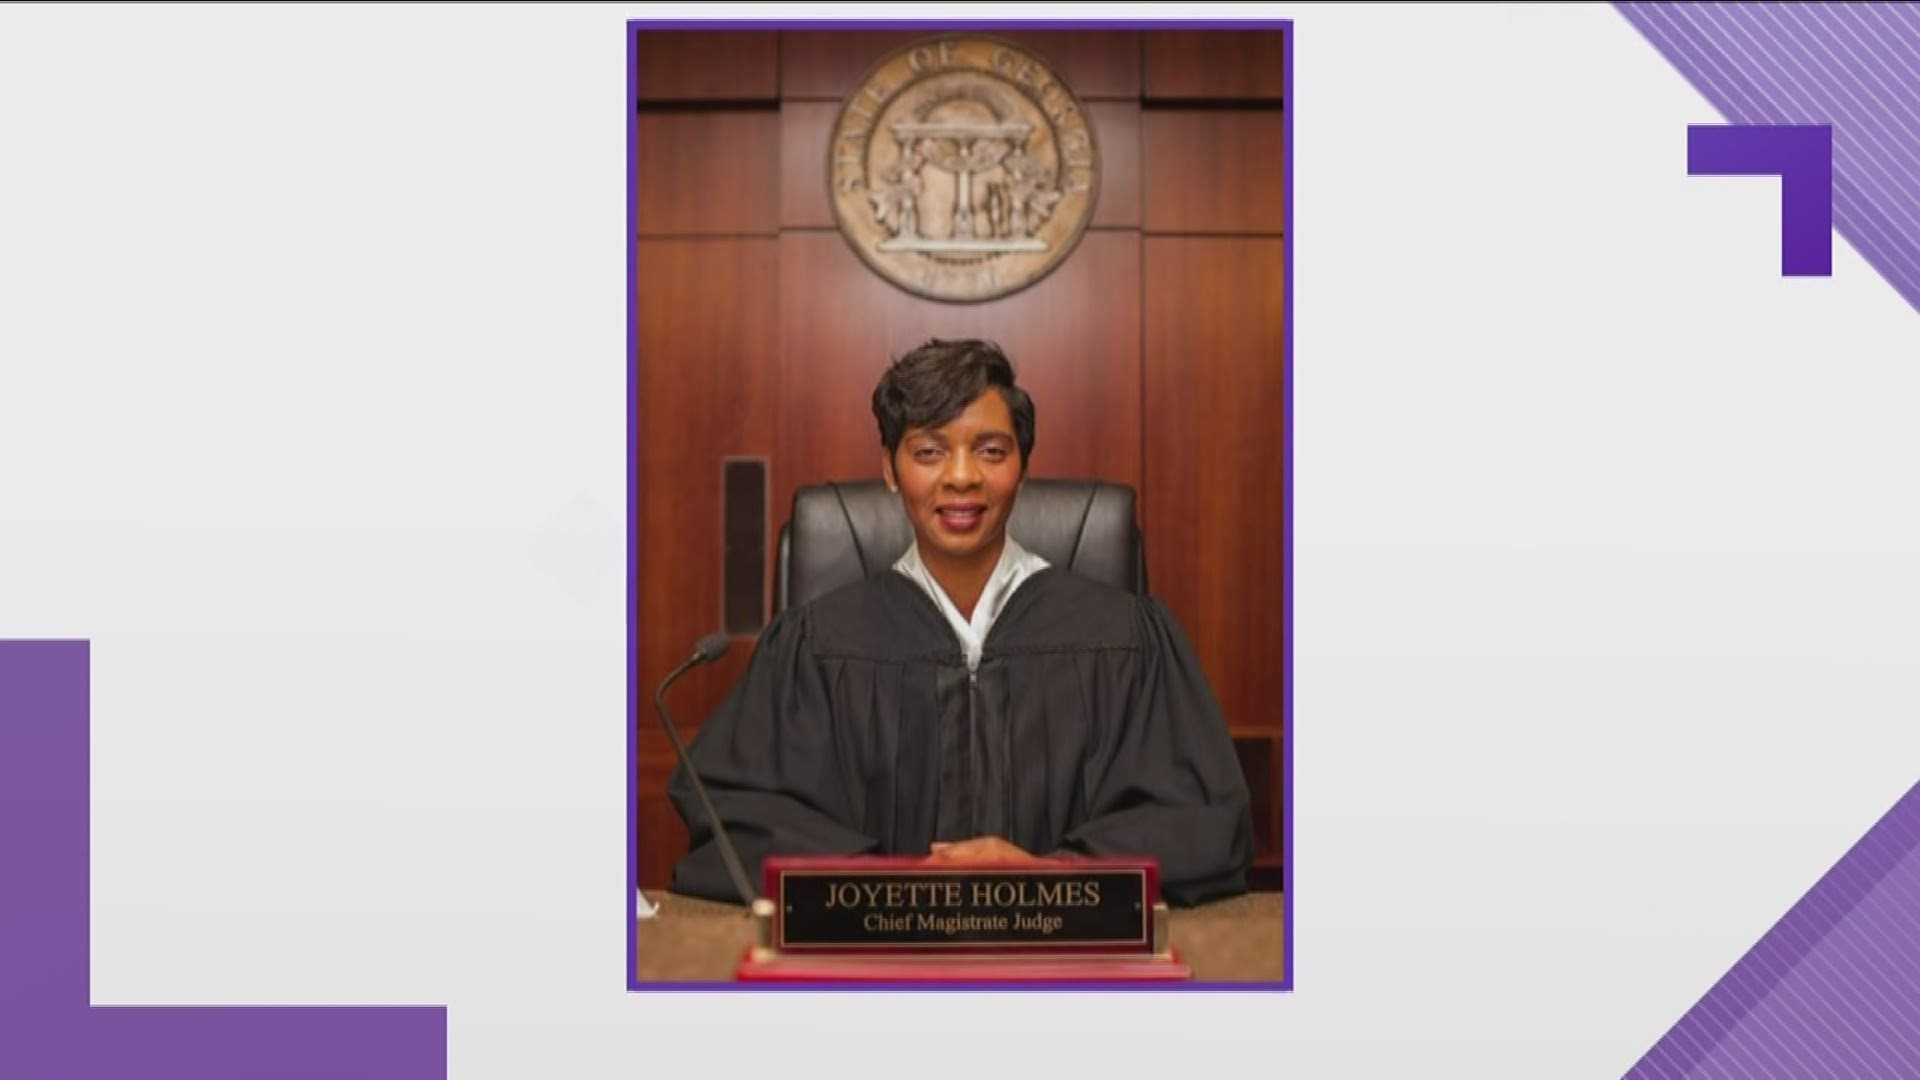 On Wednesday, Governor Brian Kemp announced that Judge Joyette M. Holmes would be taking over the position left vacant by her onetime boss Vic Reynolds when he was named toe head of the Georgia Bureau of Investigation.